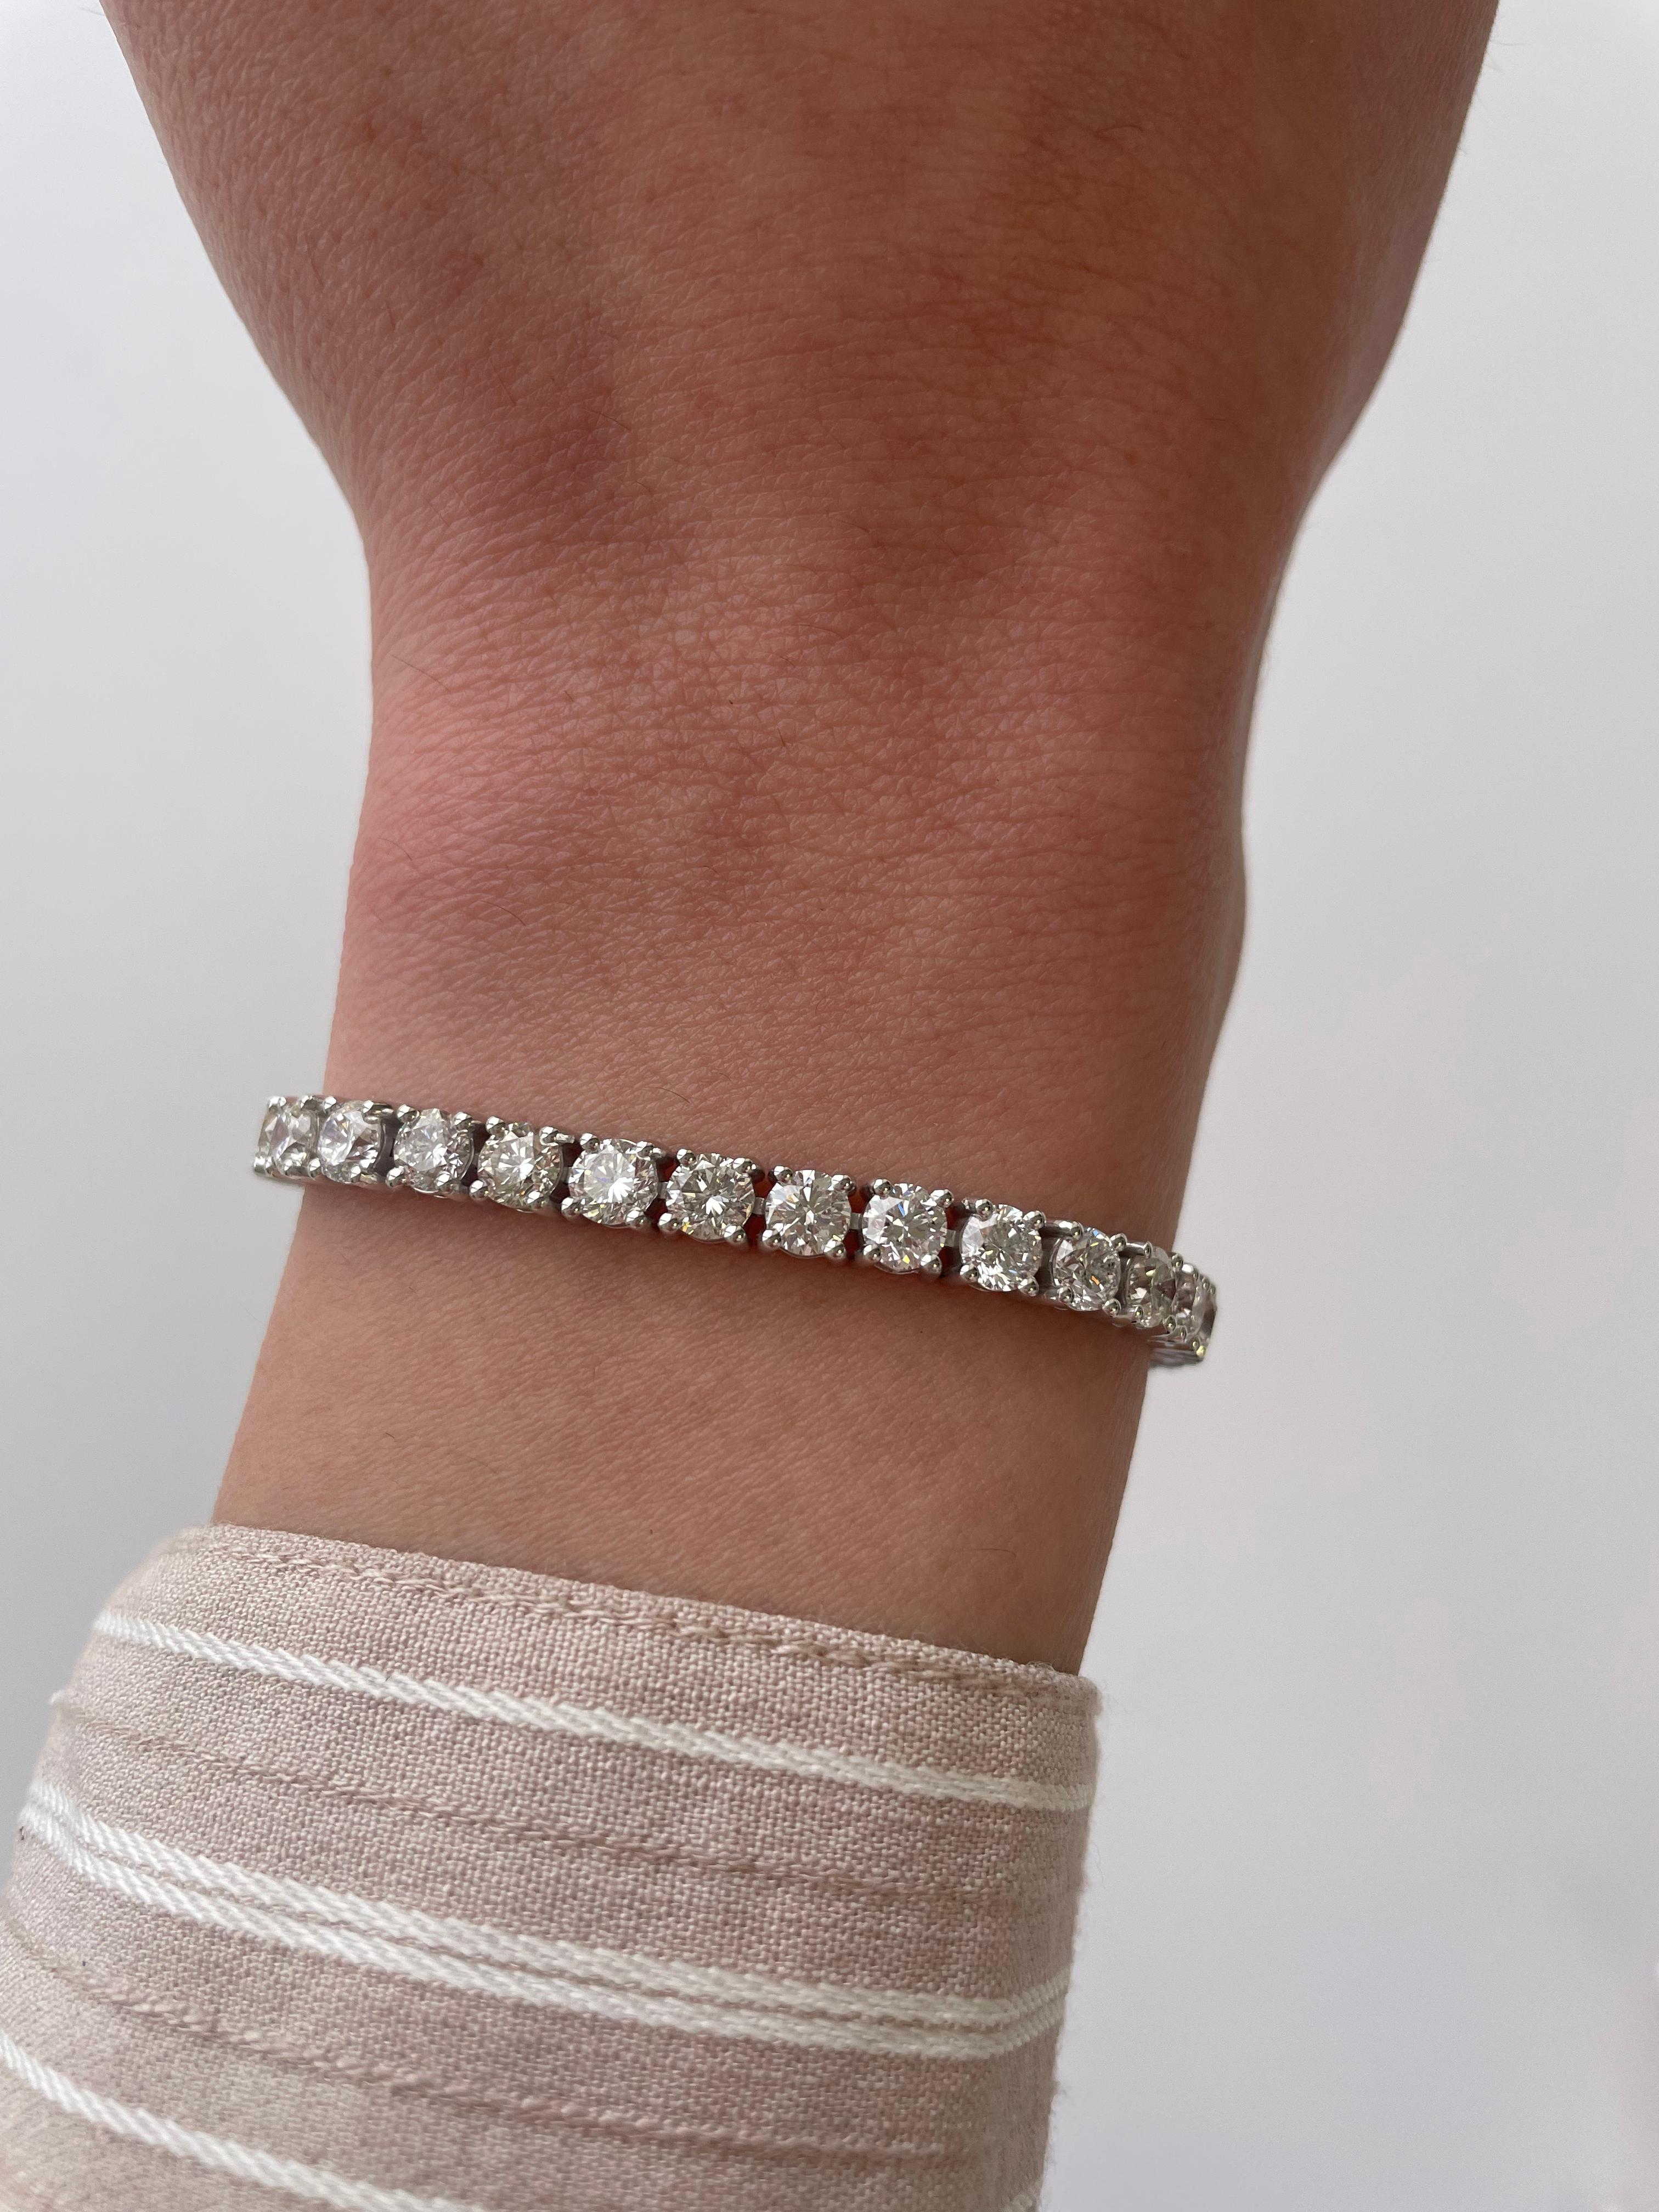 Exquisite and timeless diamonds tennis bracelet, by Alexander Beverly Hills.
38 round brilliant diamonds, 12.06 carats. Approximately G/H color and VS clarity. Four prong set in 18k white gold, 13.92grams, 7 inches. 
Accommodated with an up-to-date